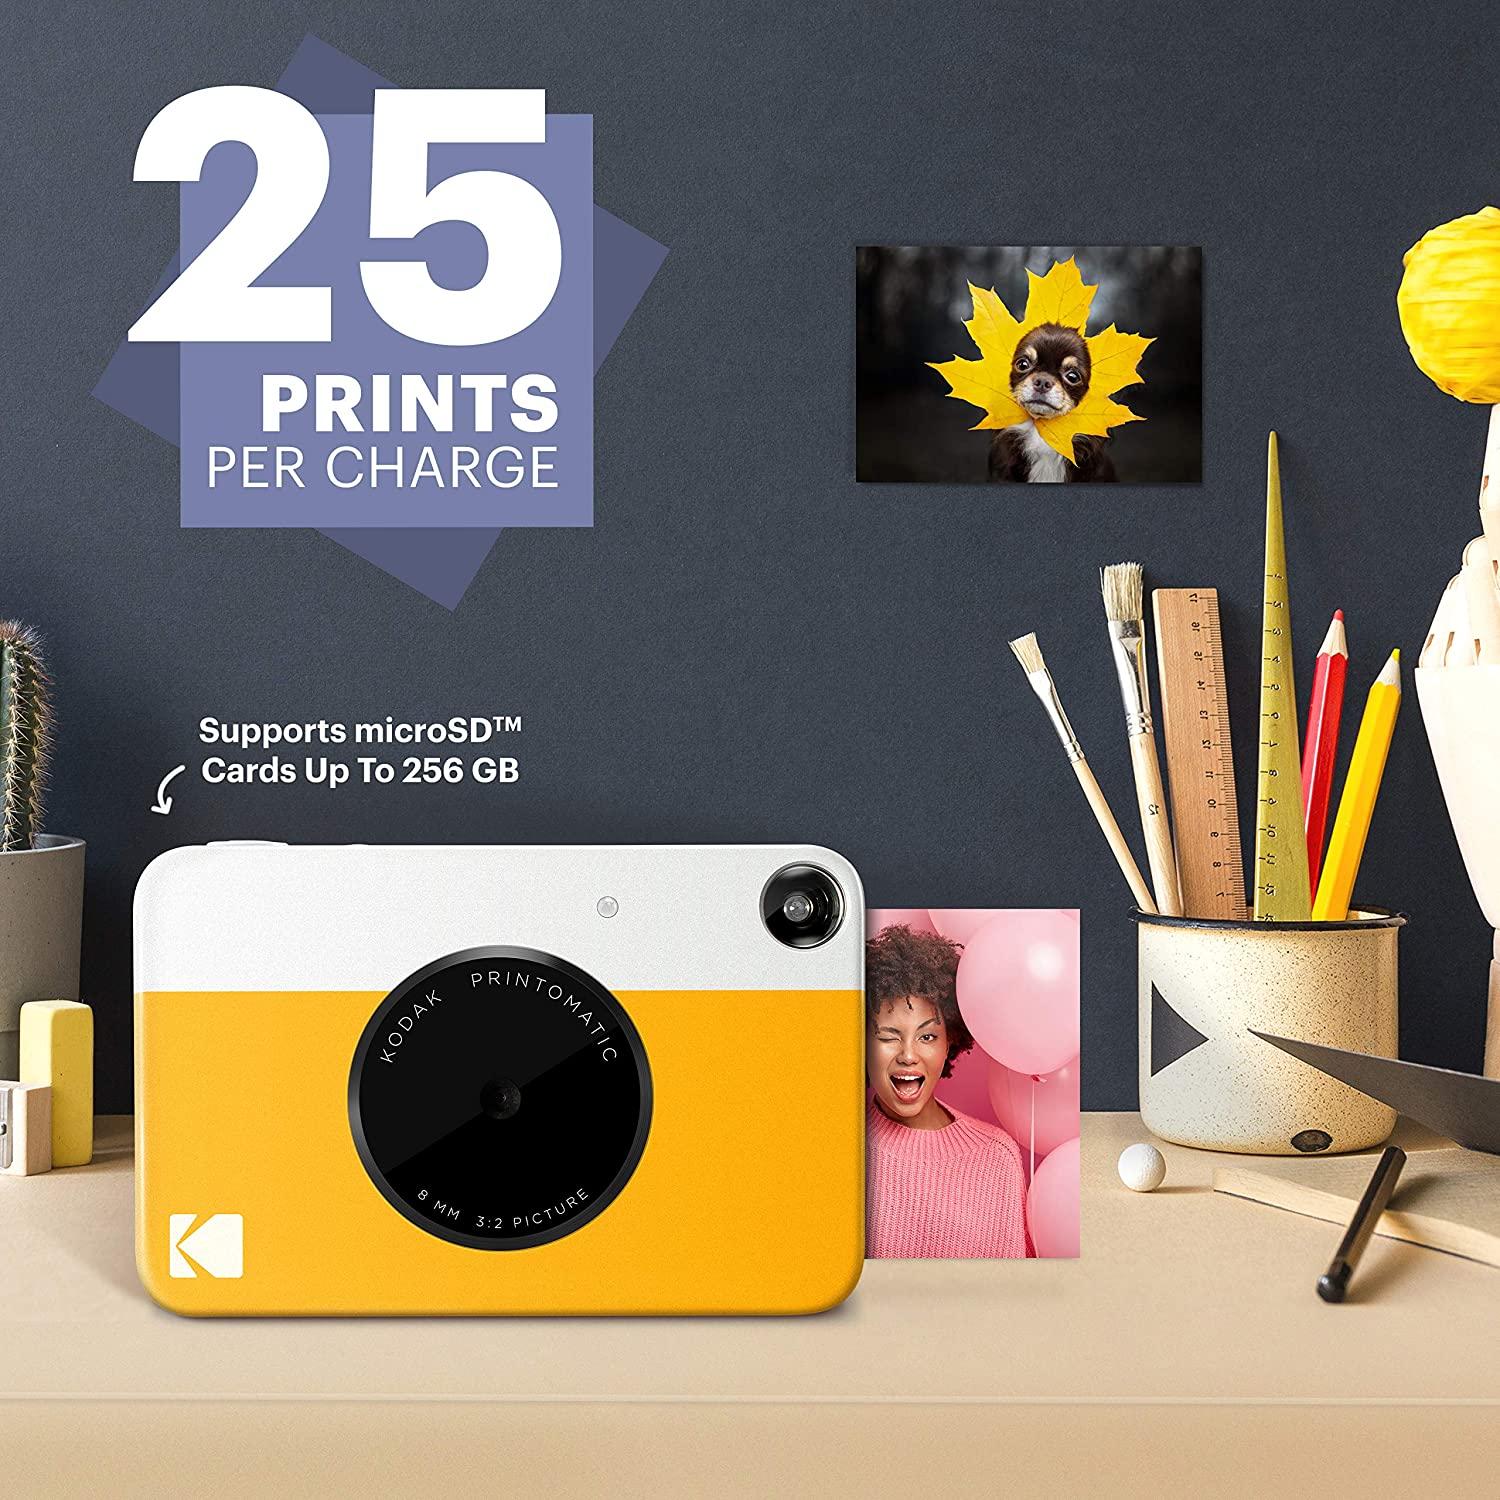 KODAK Printomatic Digital Instant Print Camera - Full Color Prints On ZINK  2x3 Sticky-Backed Photo Paper (Yellow) Print Memories Instantly